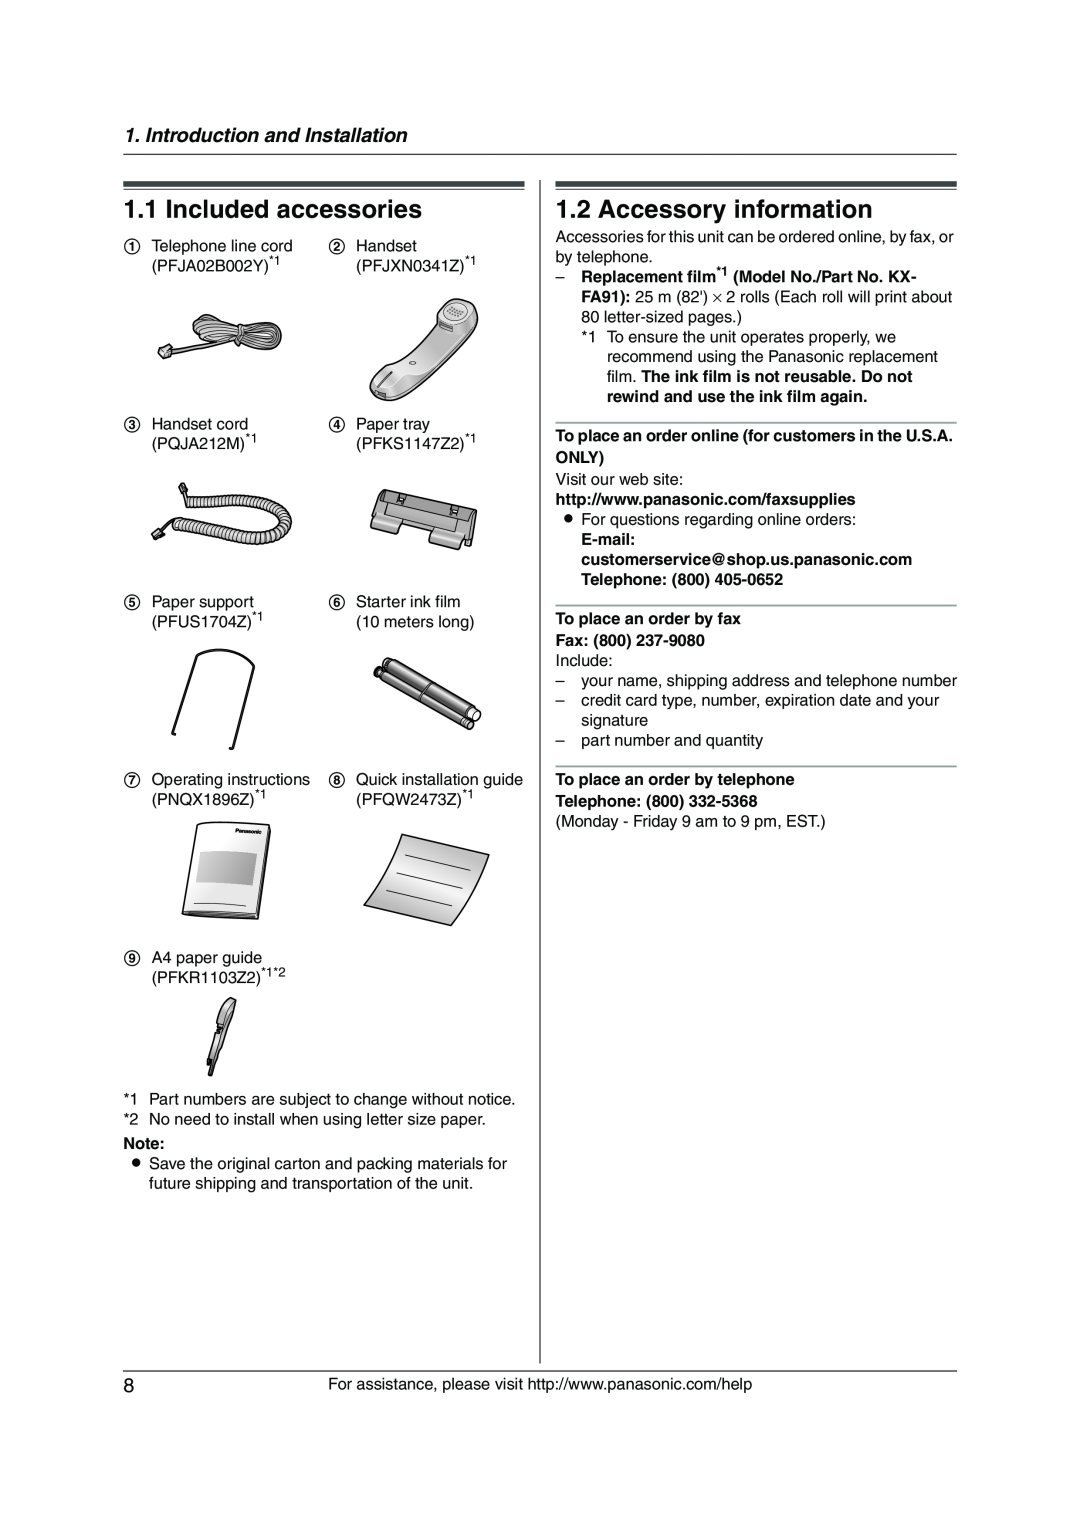 Panasonic KX-FP215 operating instructions Included accessories, Accessory information, Introduction and Installation 